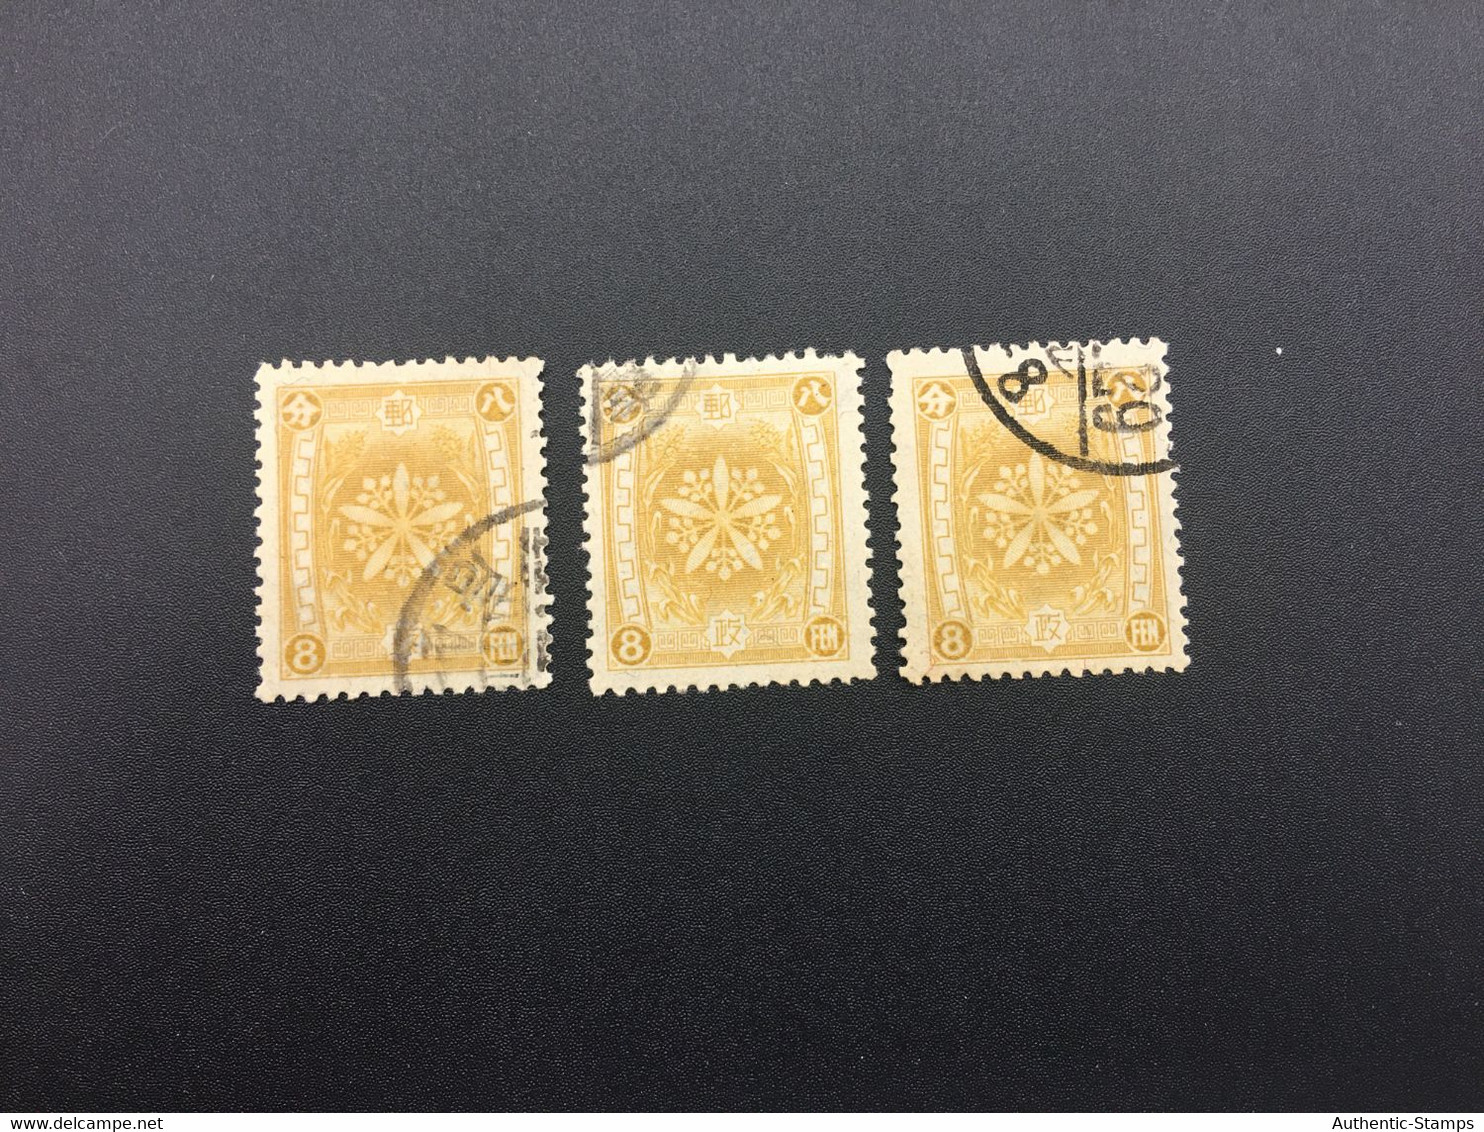 CHINA STAMP,  TIMBRO, STEMPEL,  CINA, CHINE, LIST 8258 - 1932-45 Mandchourie (Mandchoukouo)